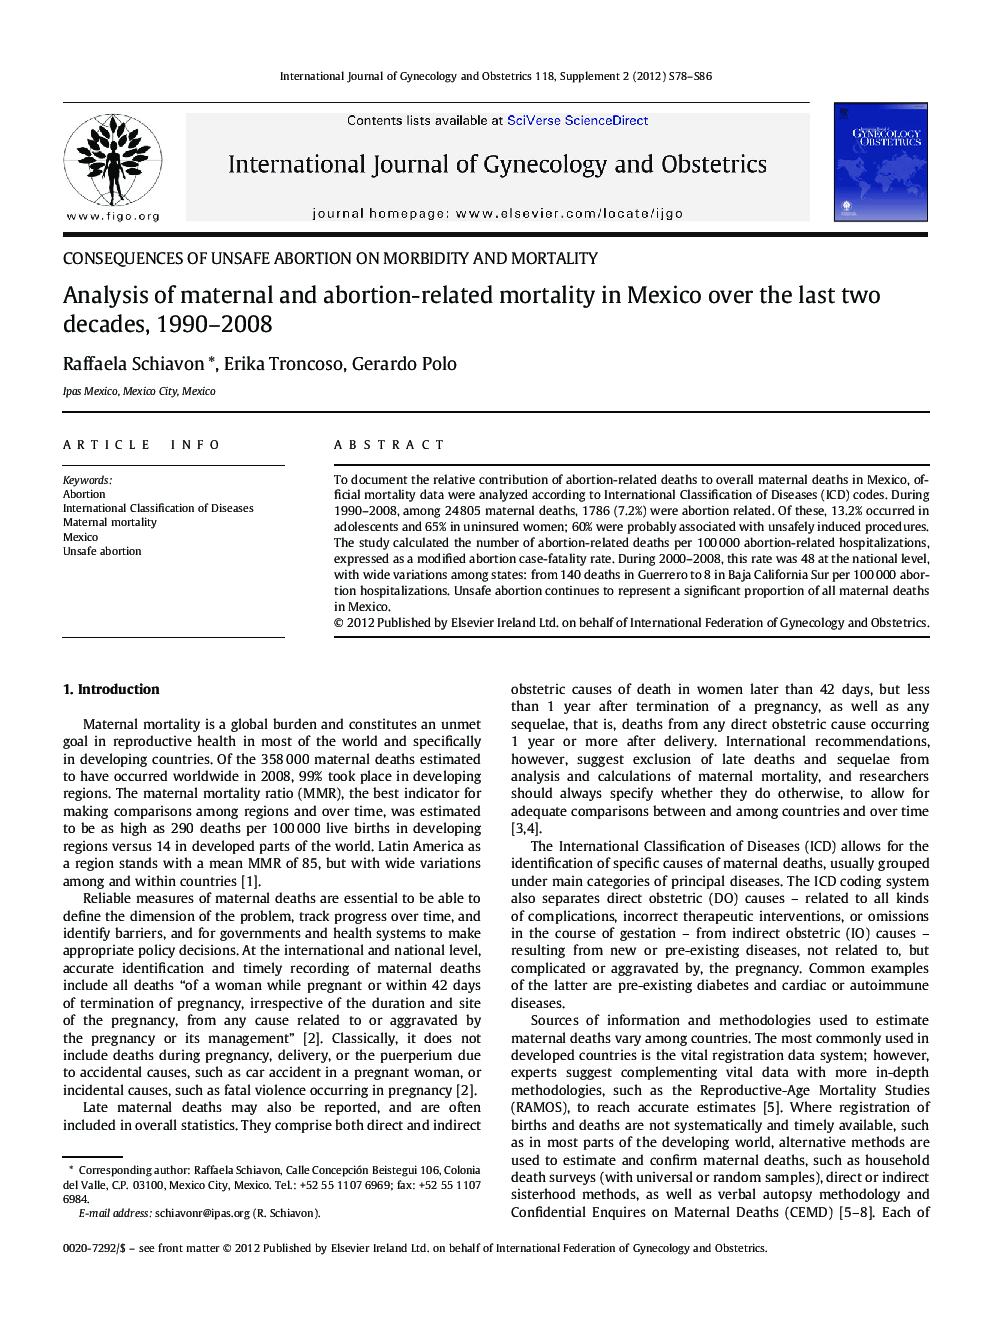 Analysis of maternal and abortion-related mortality in Mexico over the last two decades, 1990–2008